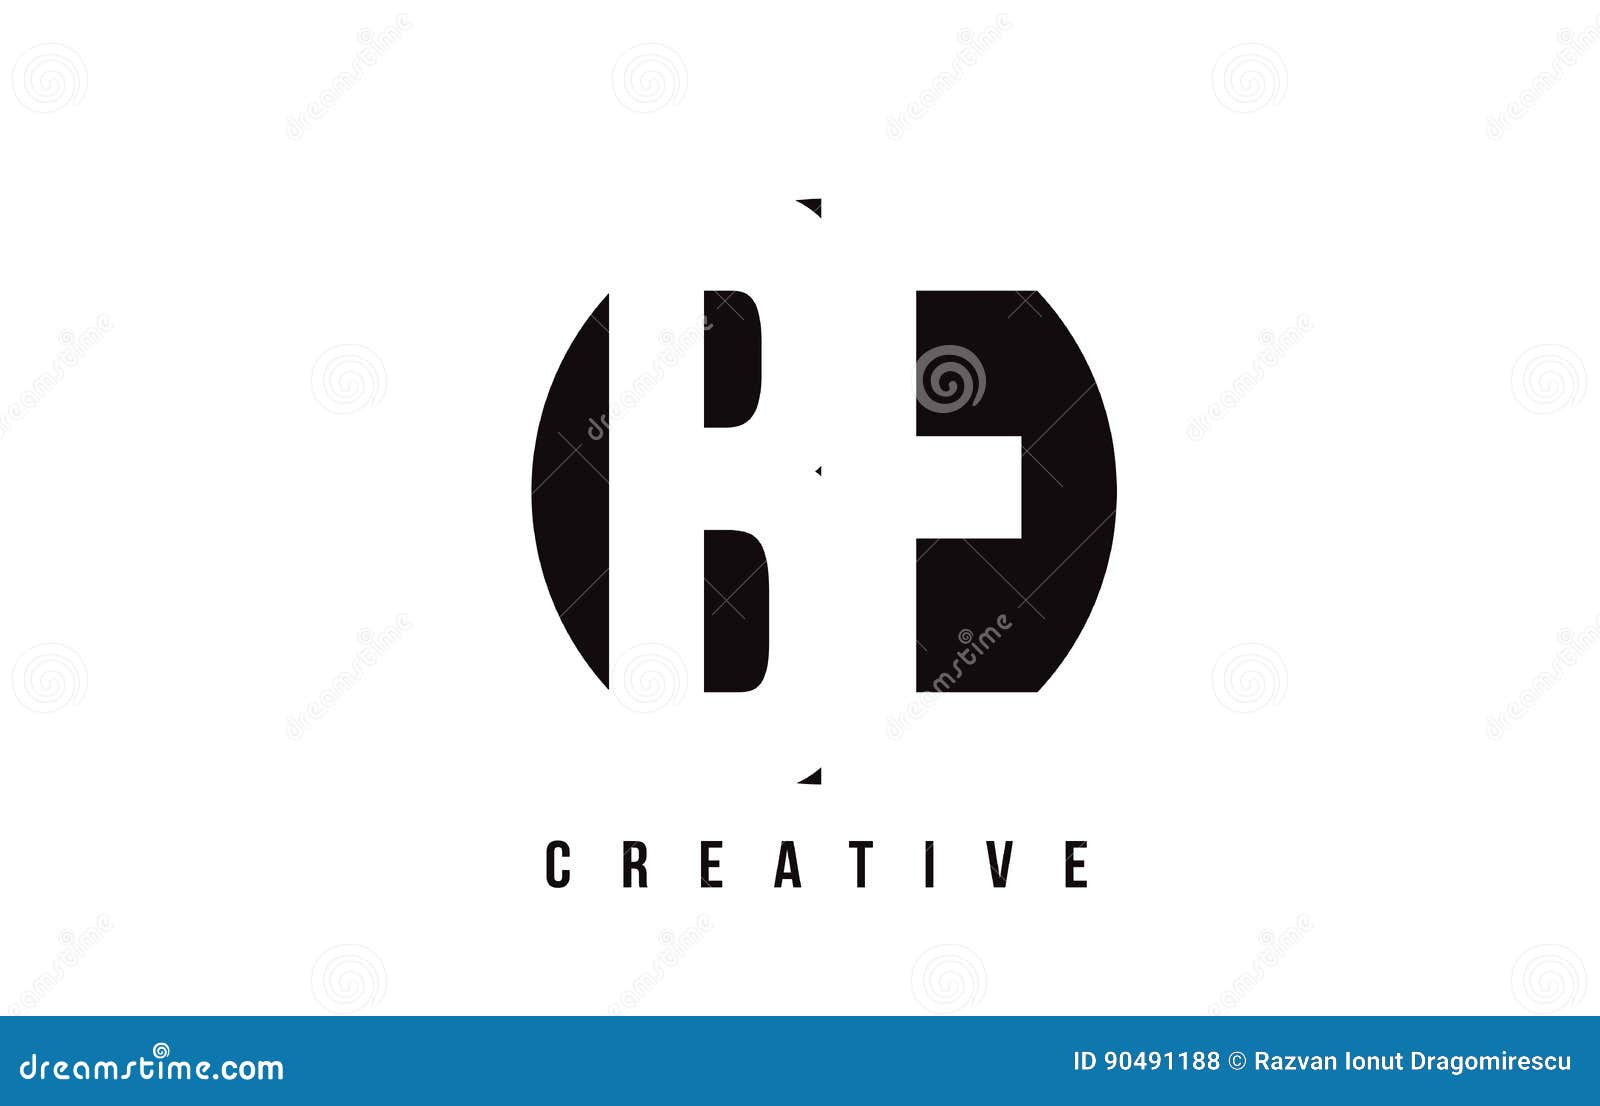 be b e white letter logo  with circle background.